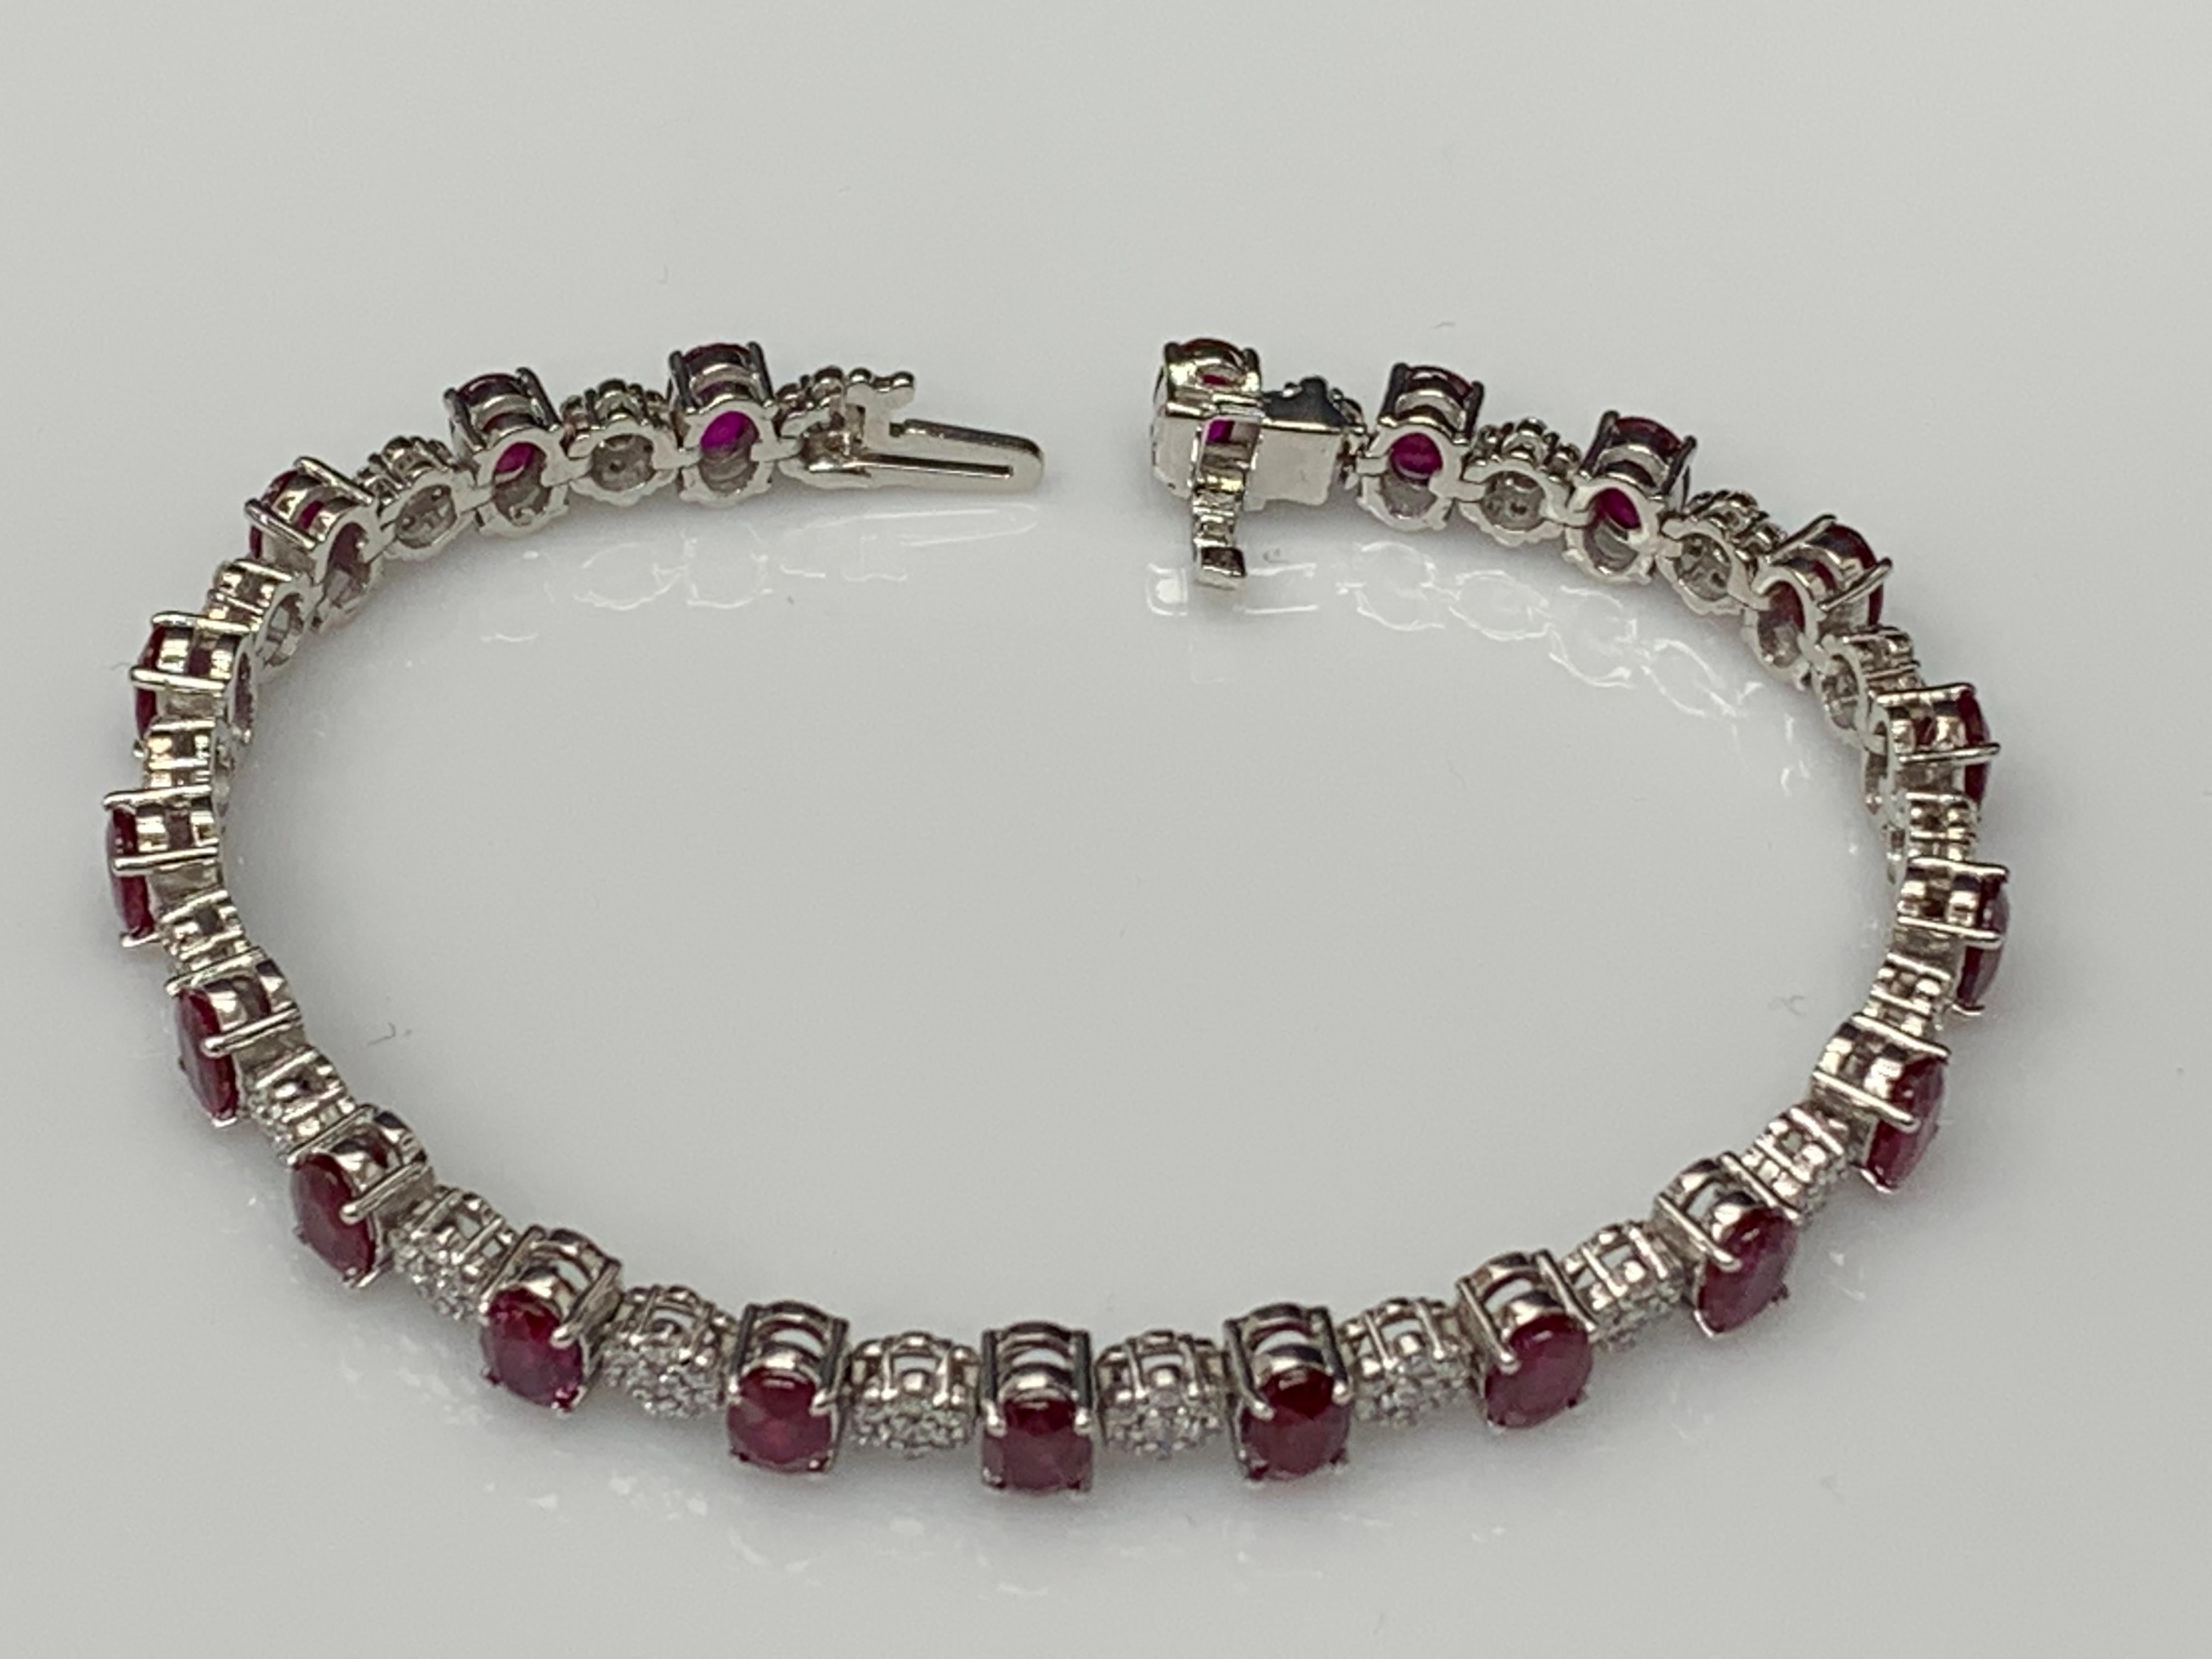 A fashionable and color-rich tennis bracelet showcasing oval cut 20 Ruby weighing 10.34 carats total, spaced by 140 flower shape round brilliant diamonds weighing 1.18 carats total. Made in 14k white gold.

All diamonds are GH color SI1 Clarity.
Can